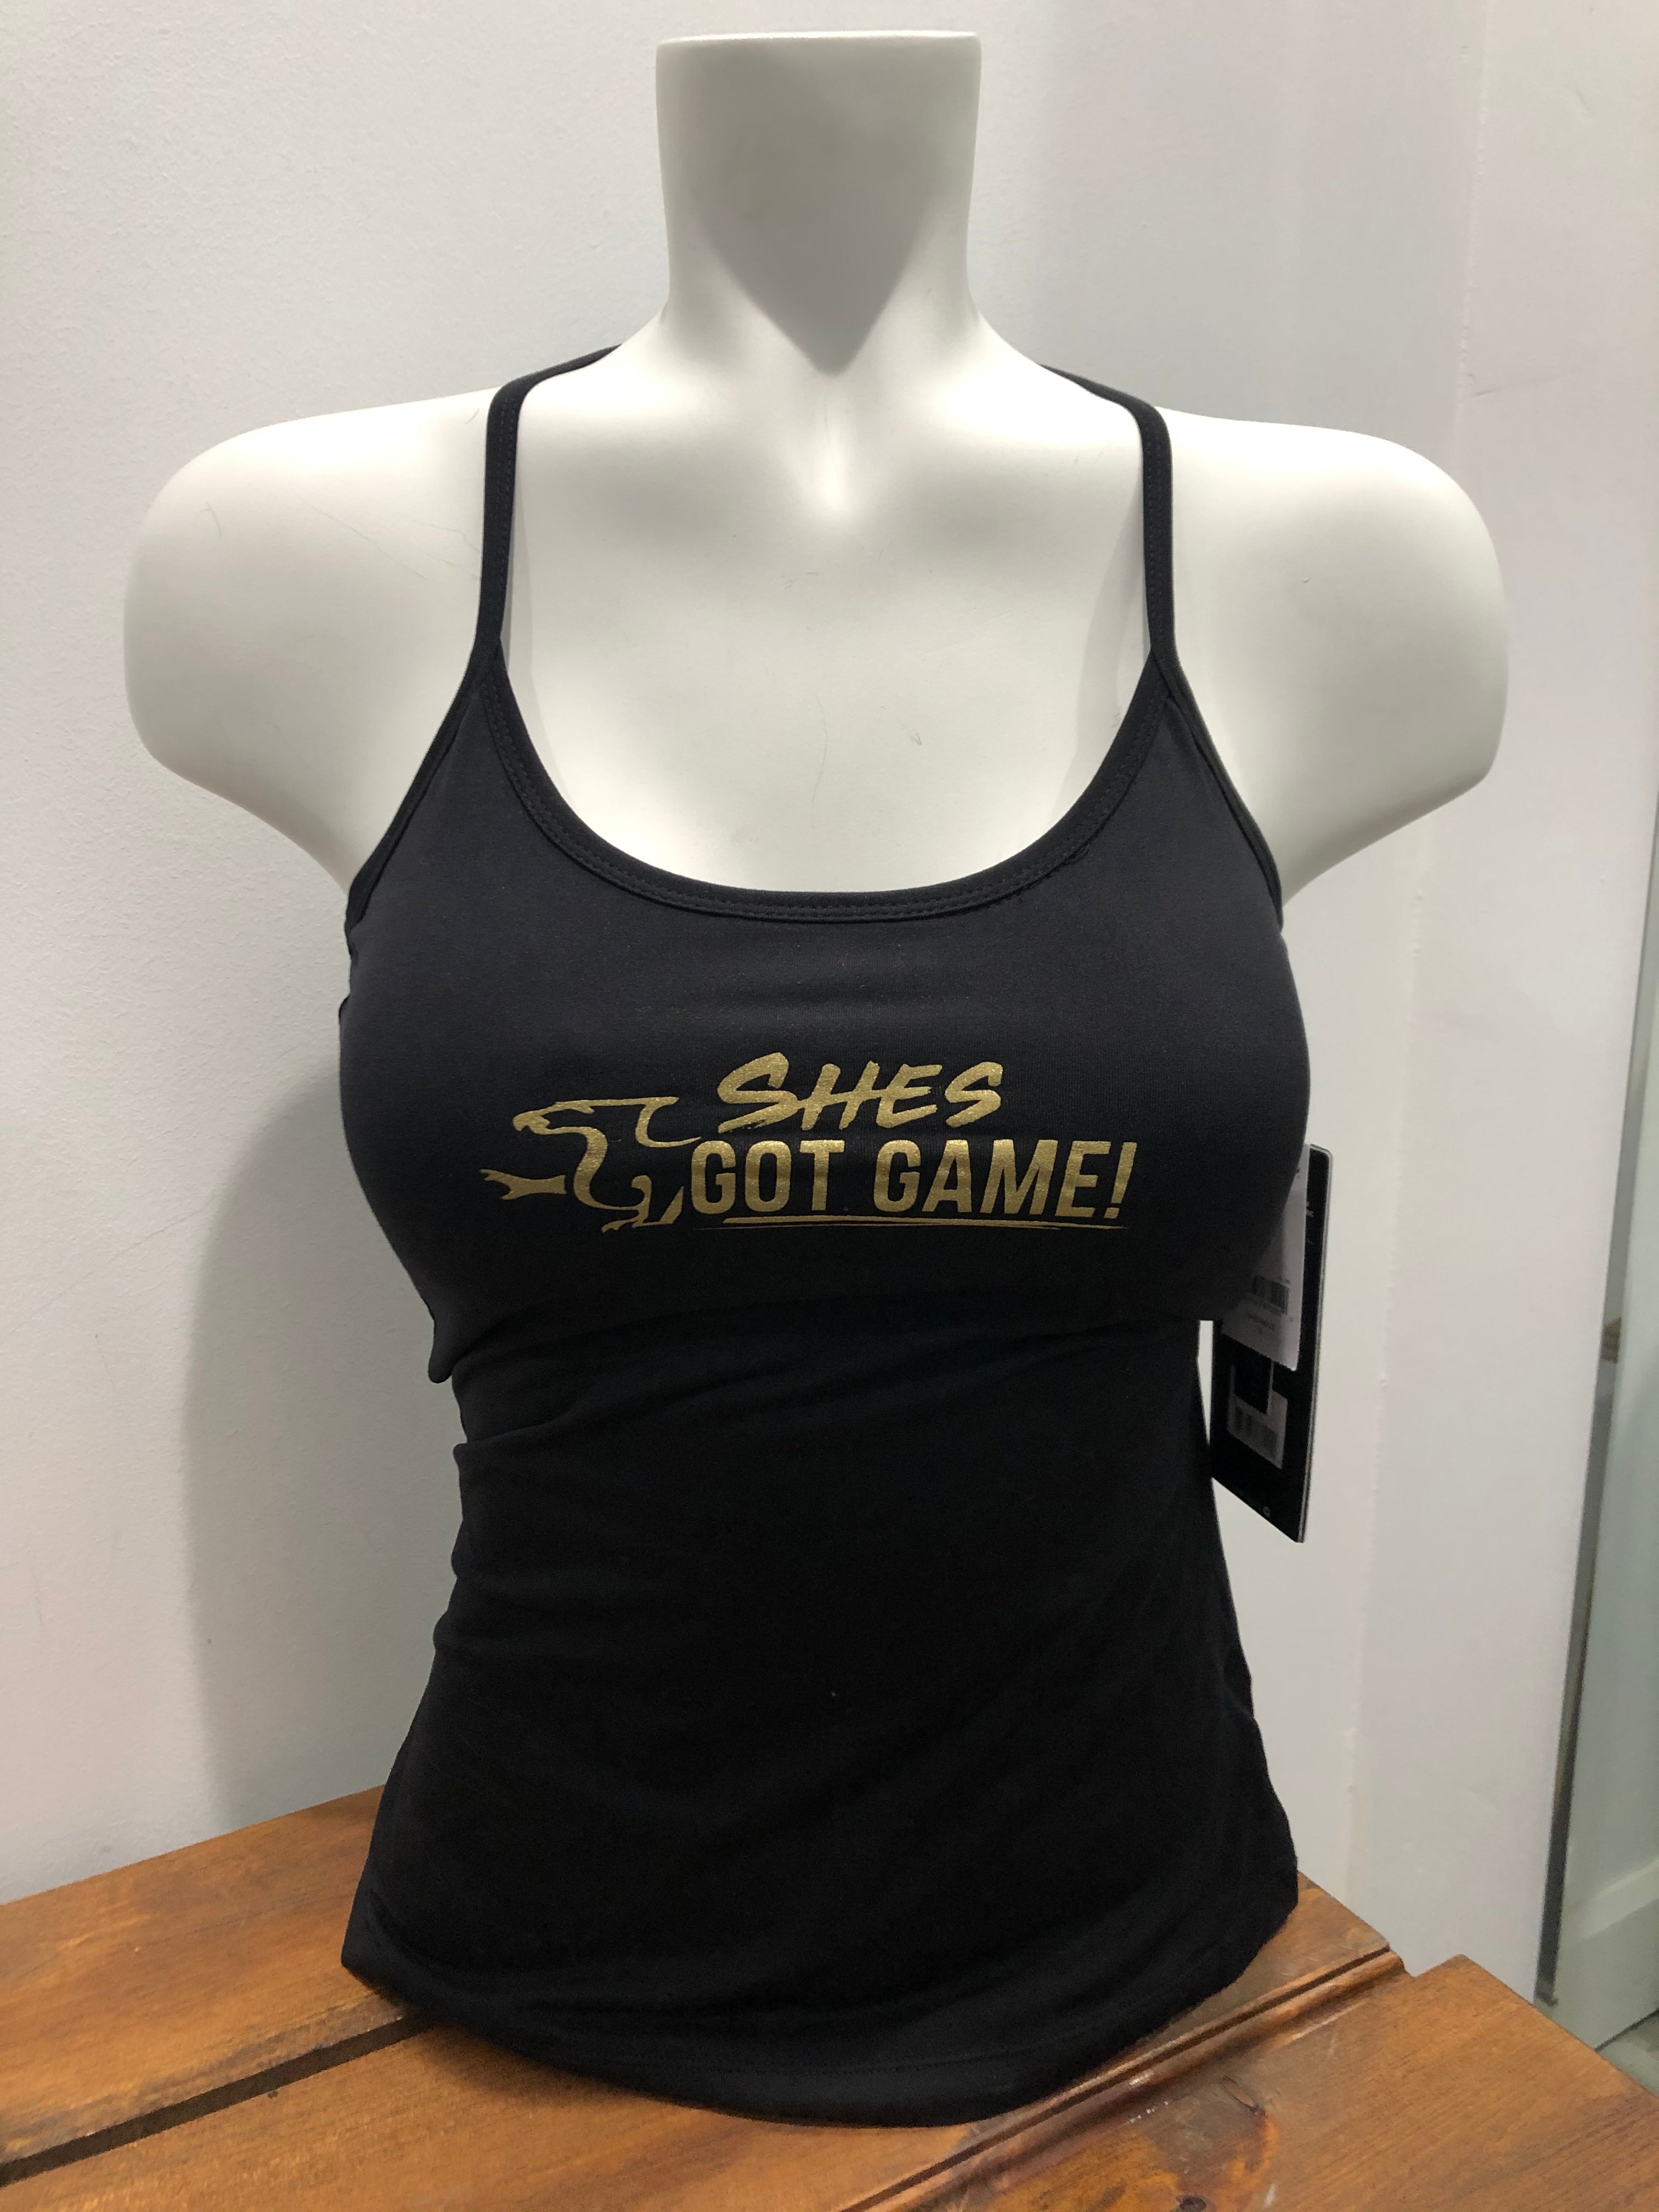 SGG - "She's Got Game" MPG Essential Tank ADULT